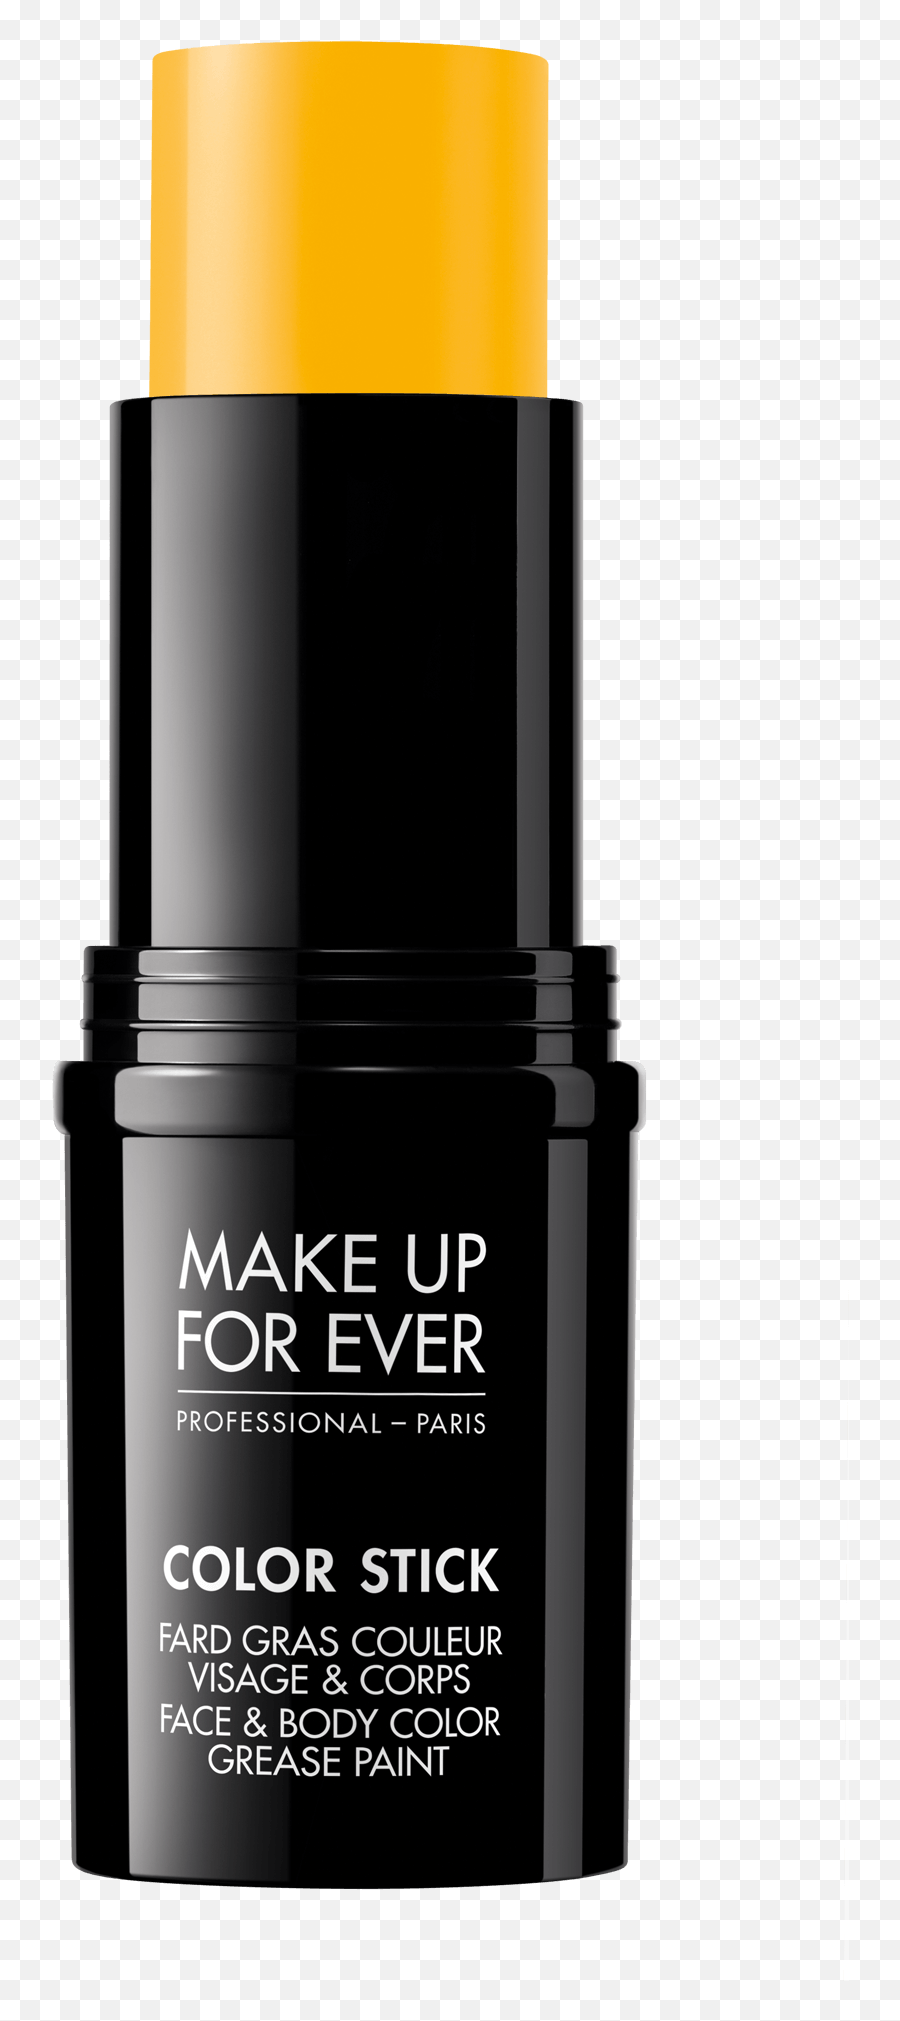 Paint Smear Png - Make Up For Ever Color Stick 4579979 Make Up For Ever,Paint Smear Png